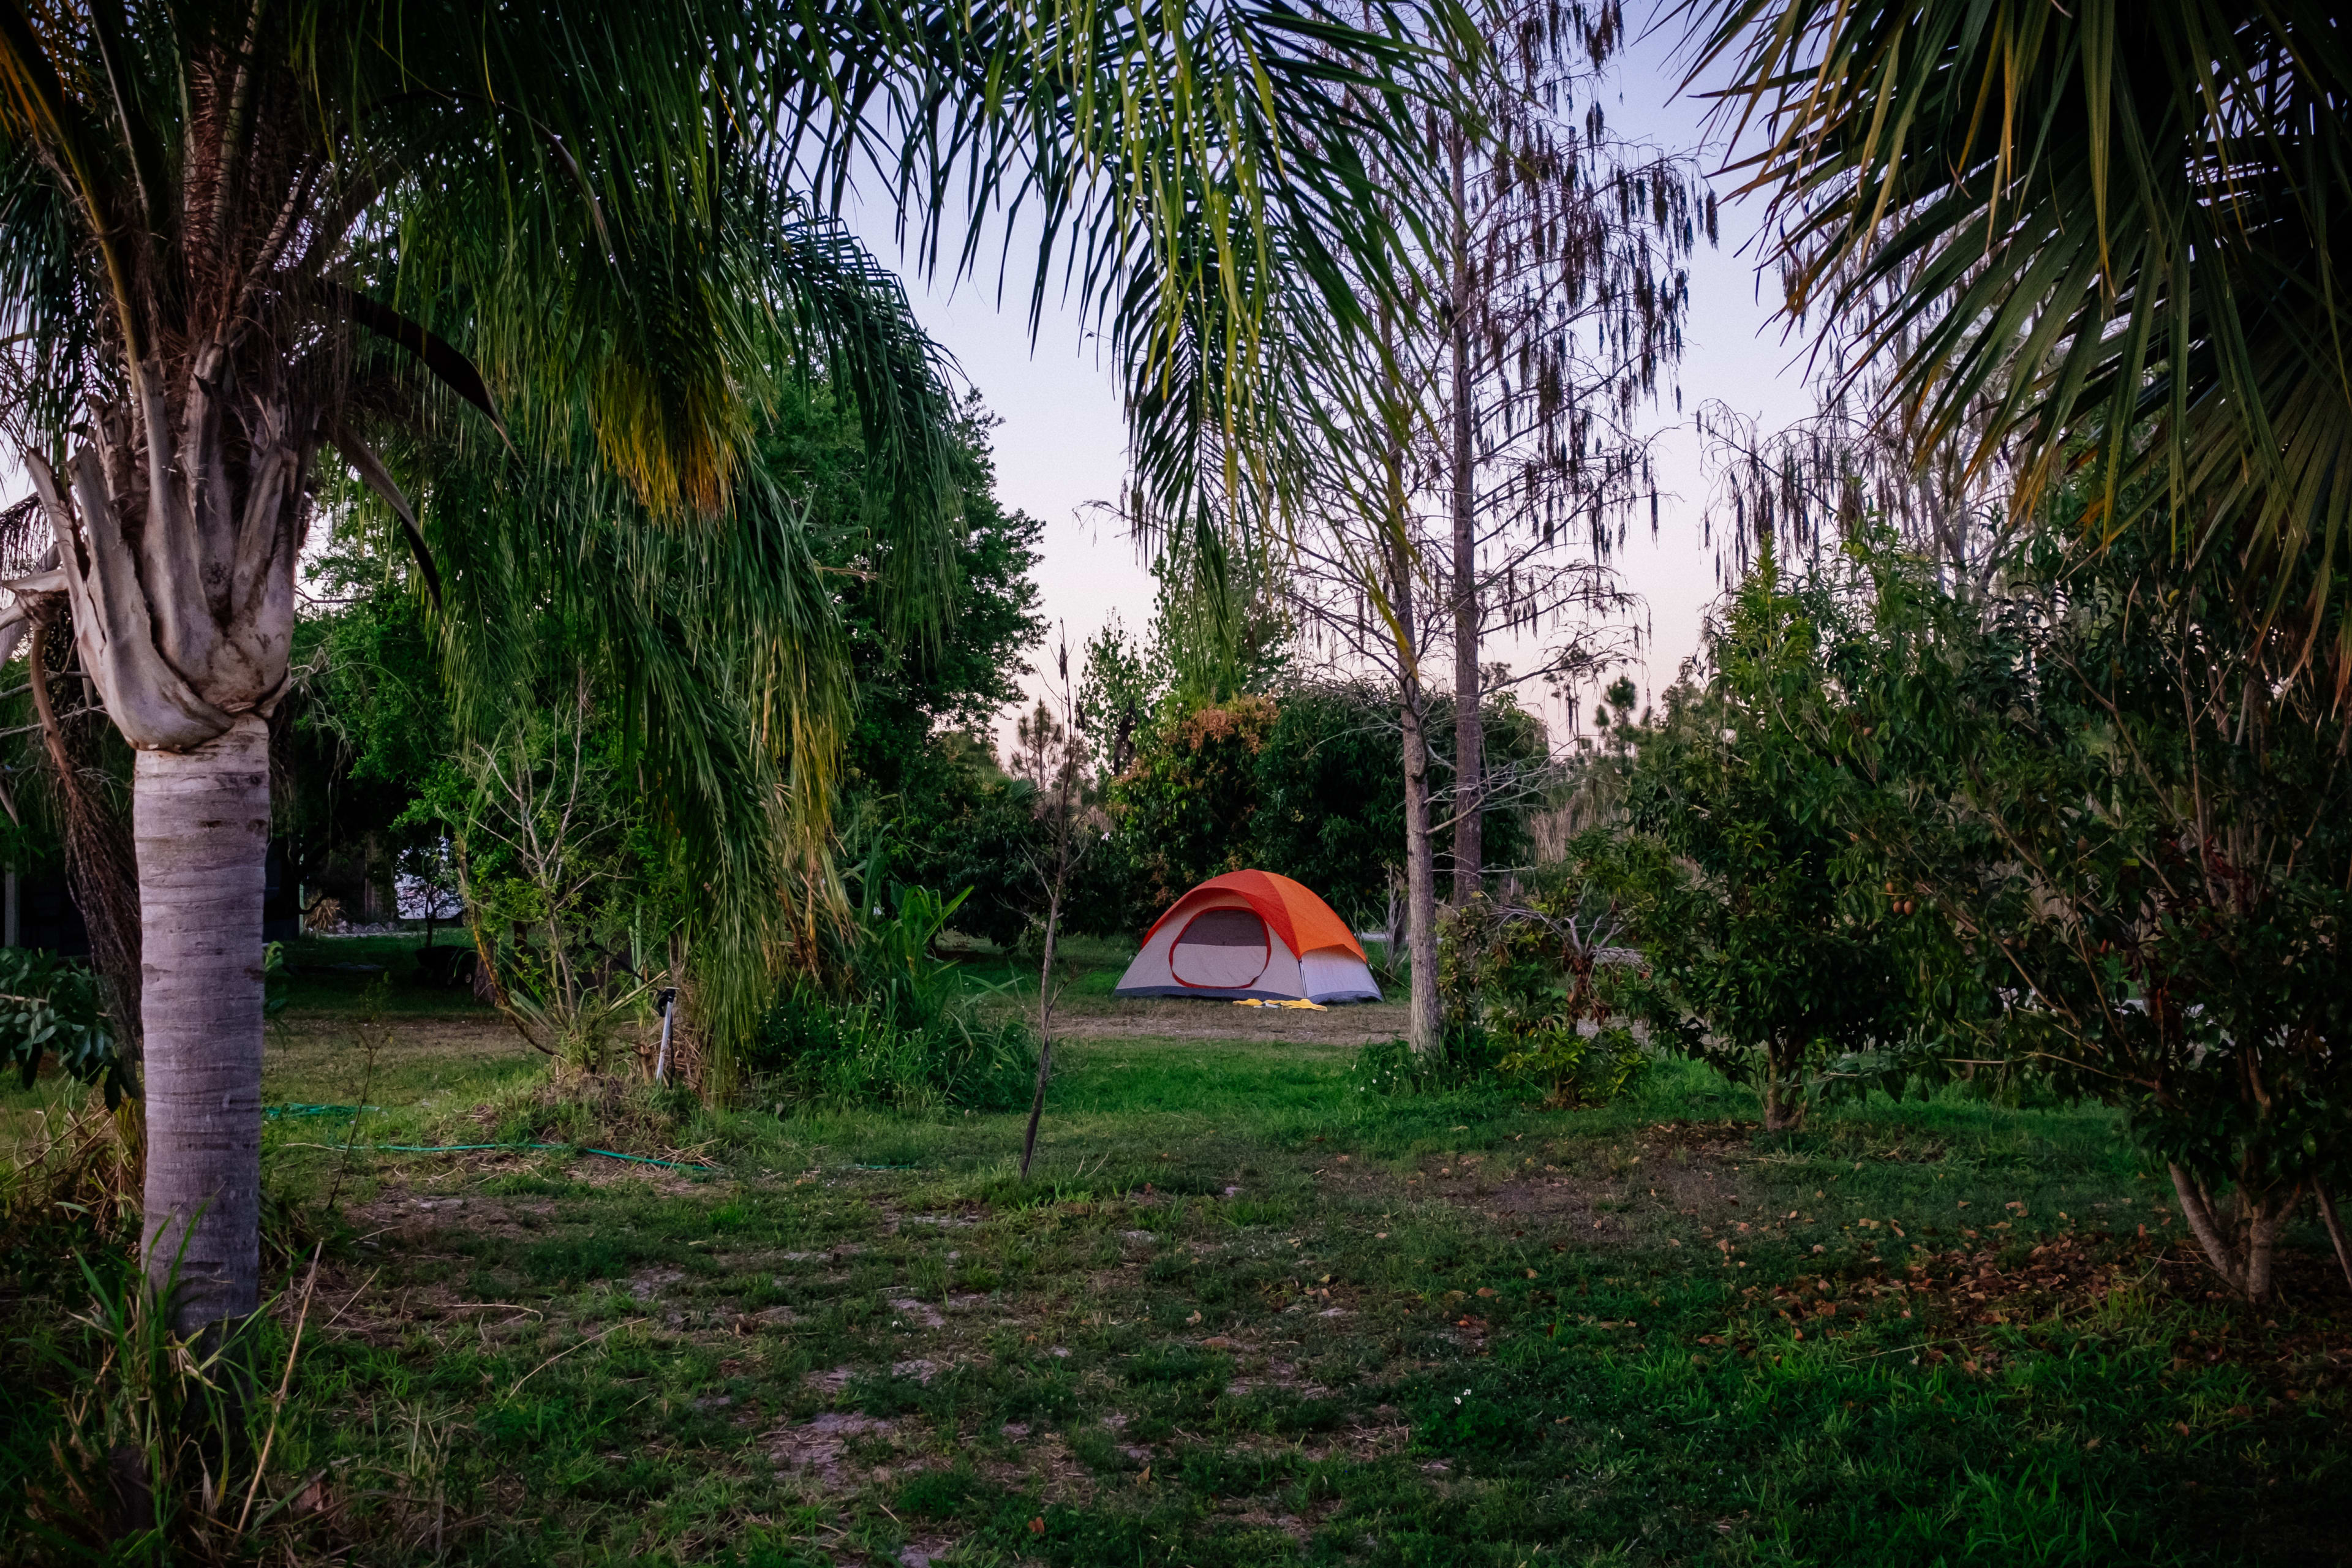 Camping in the fruit trees